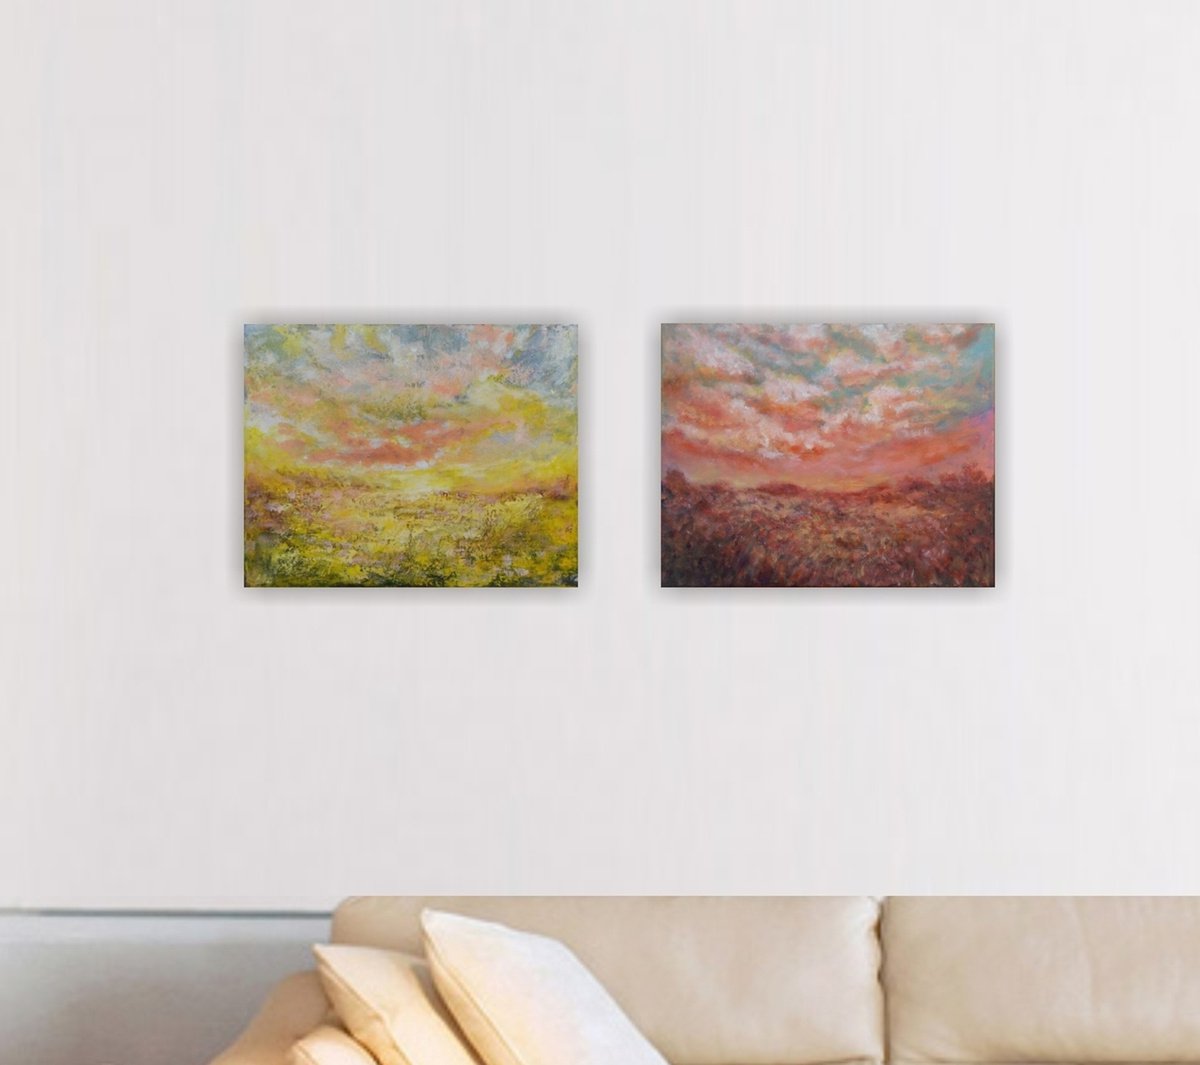 FROM DAWN TO SUNSET, 60x24cm, diptych field meadow landscape by Emilia Milcheva